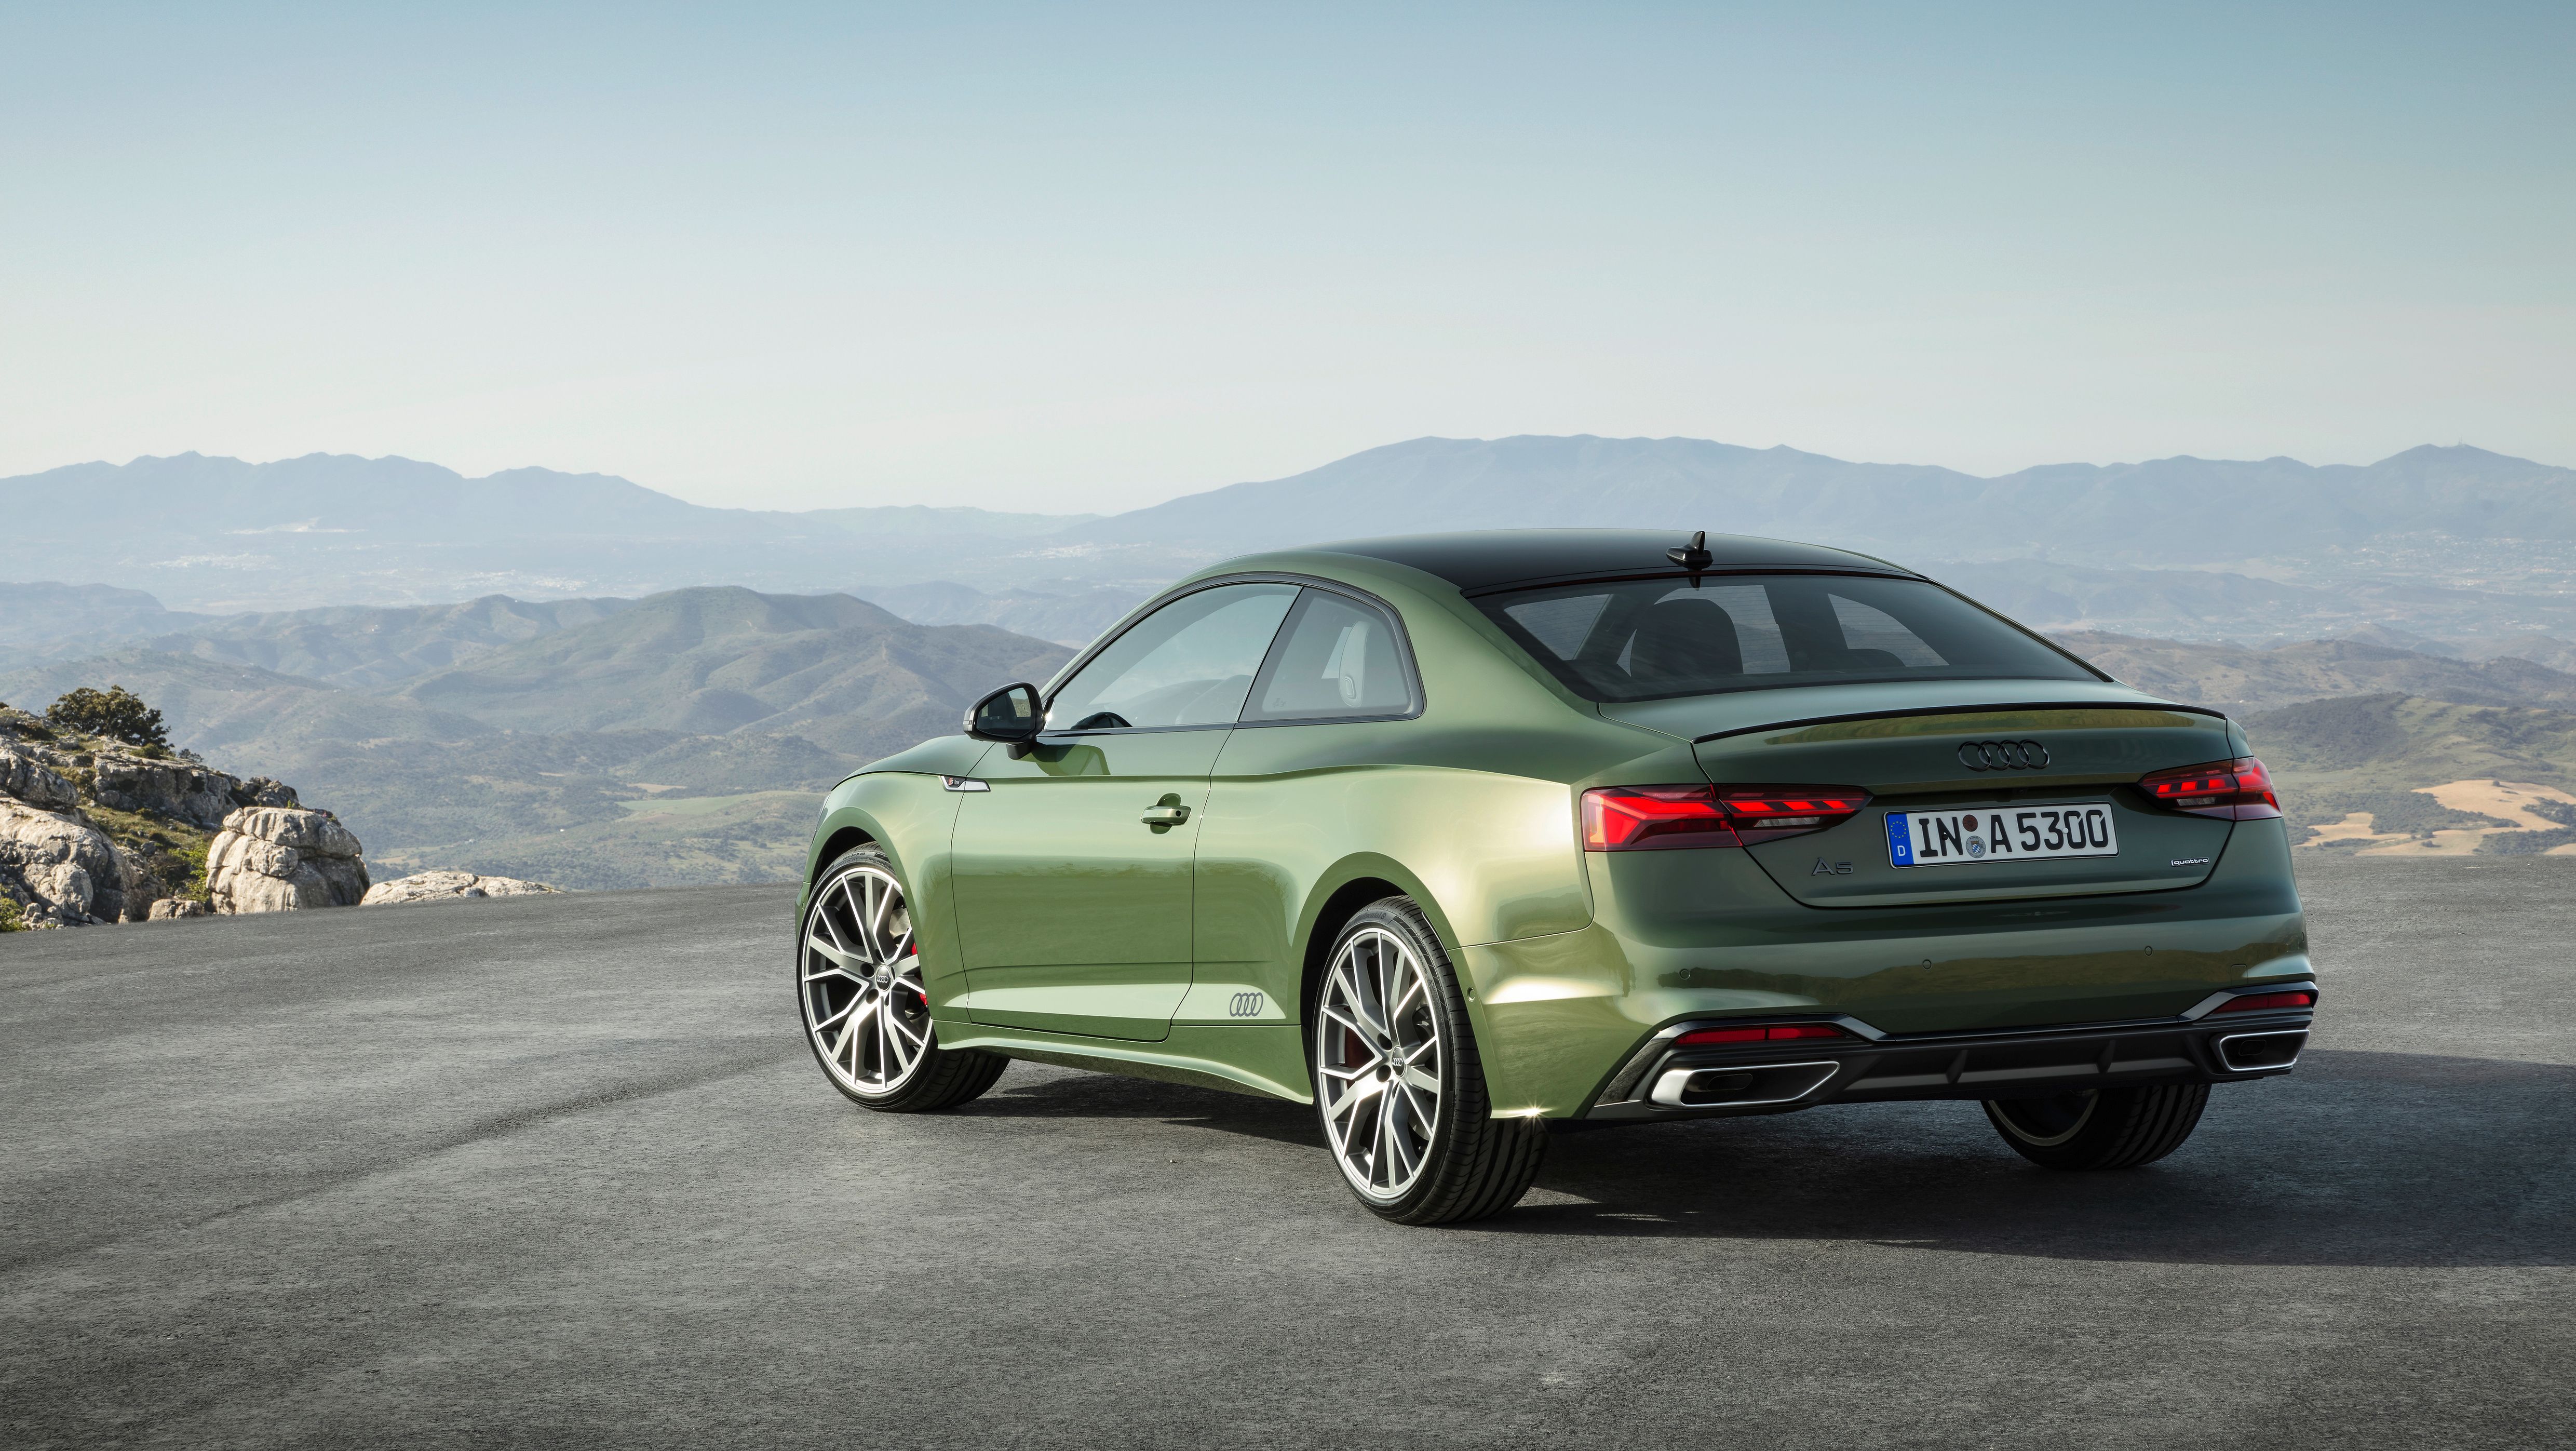 2022 Audi A5 Coupe - Performance, Price, and Photos